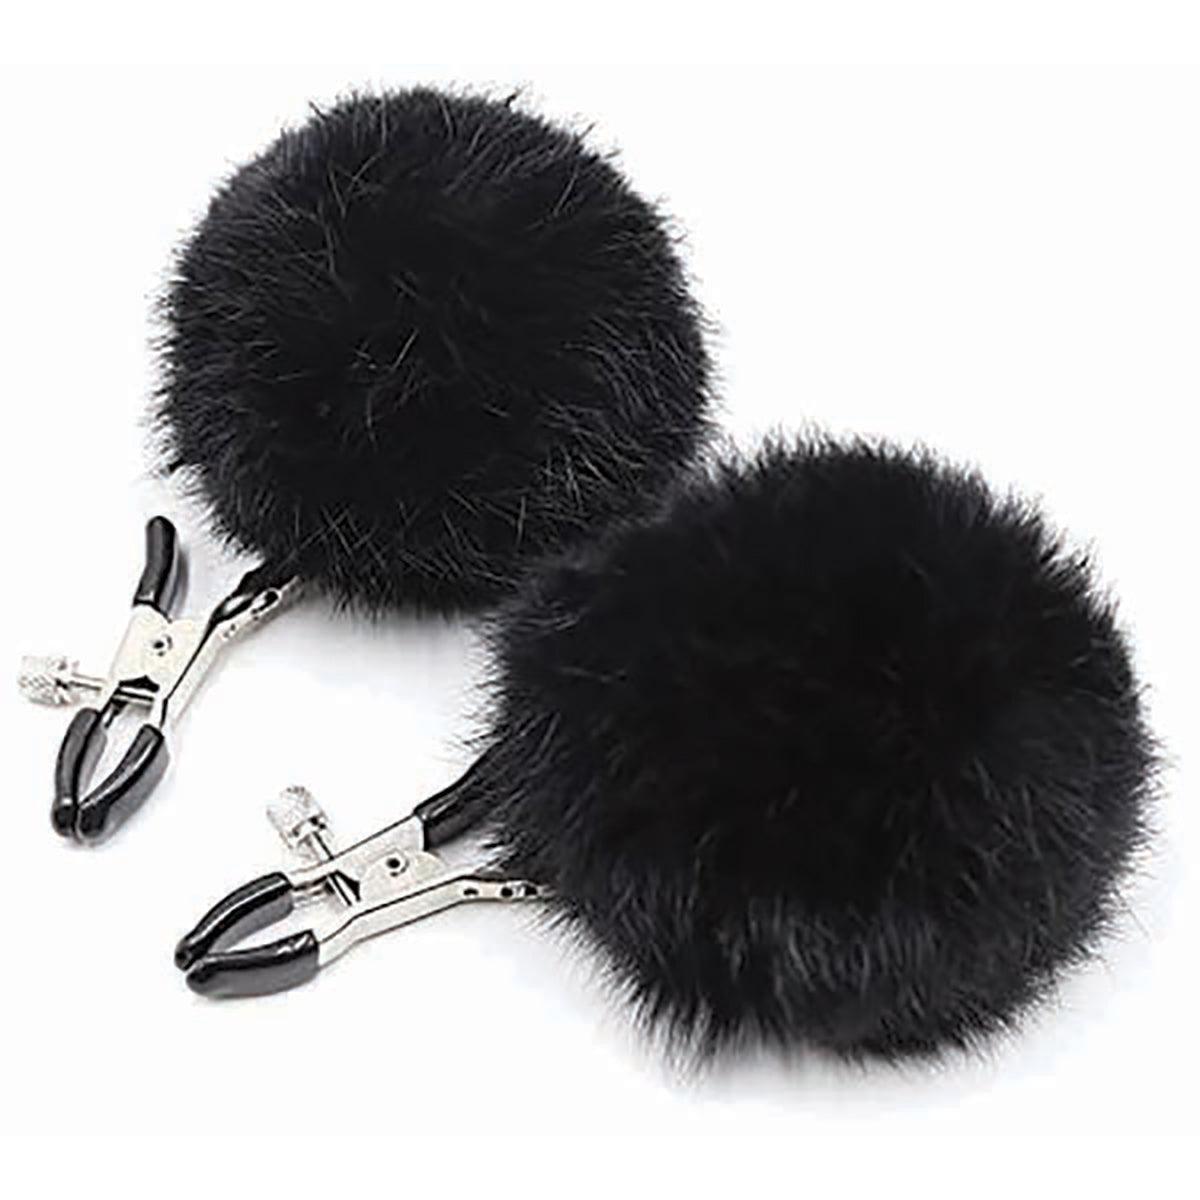 Sexy AF Puff Clamps - Black - shop enby